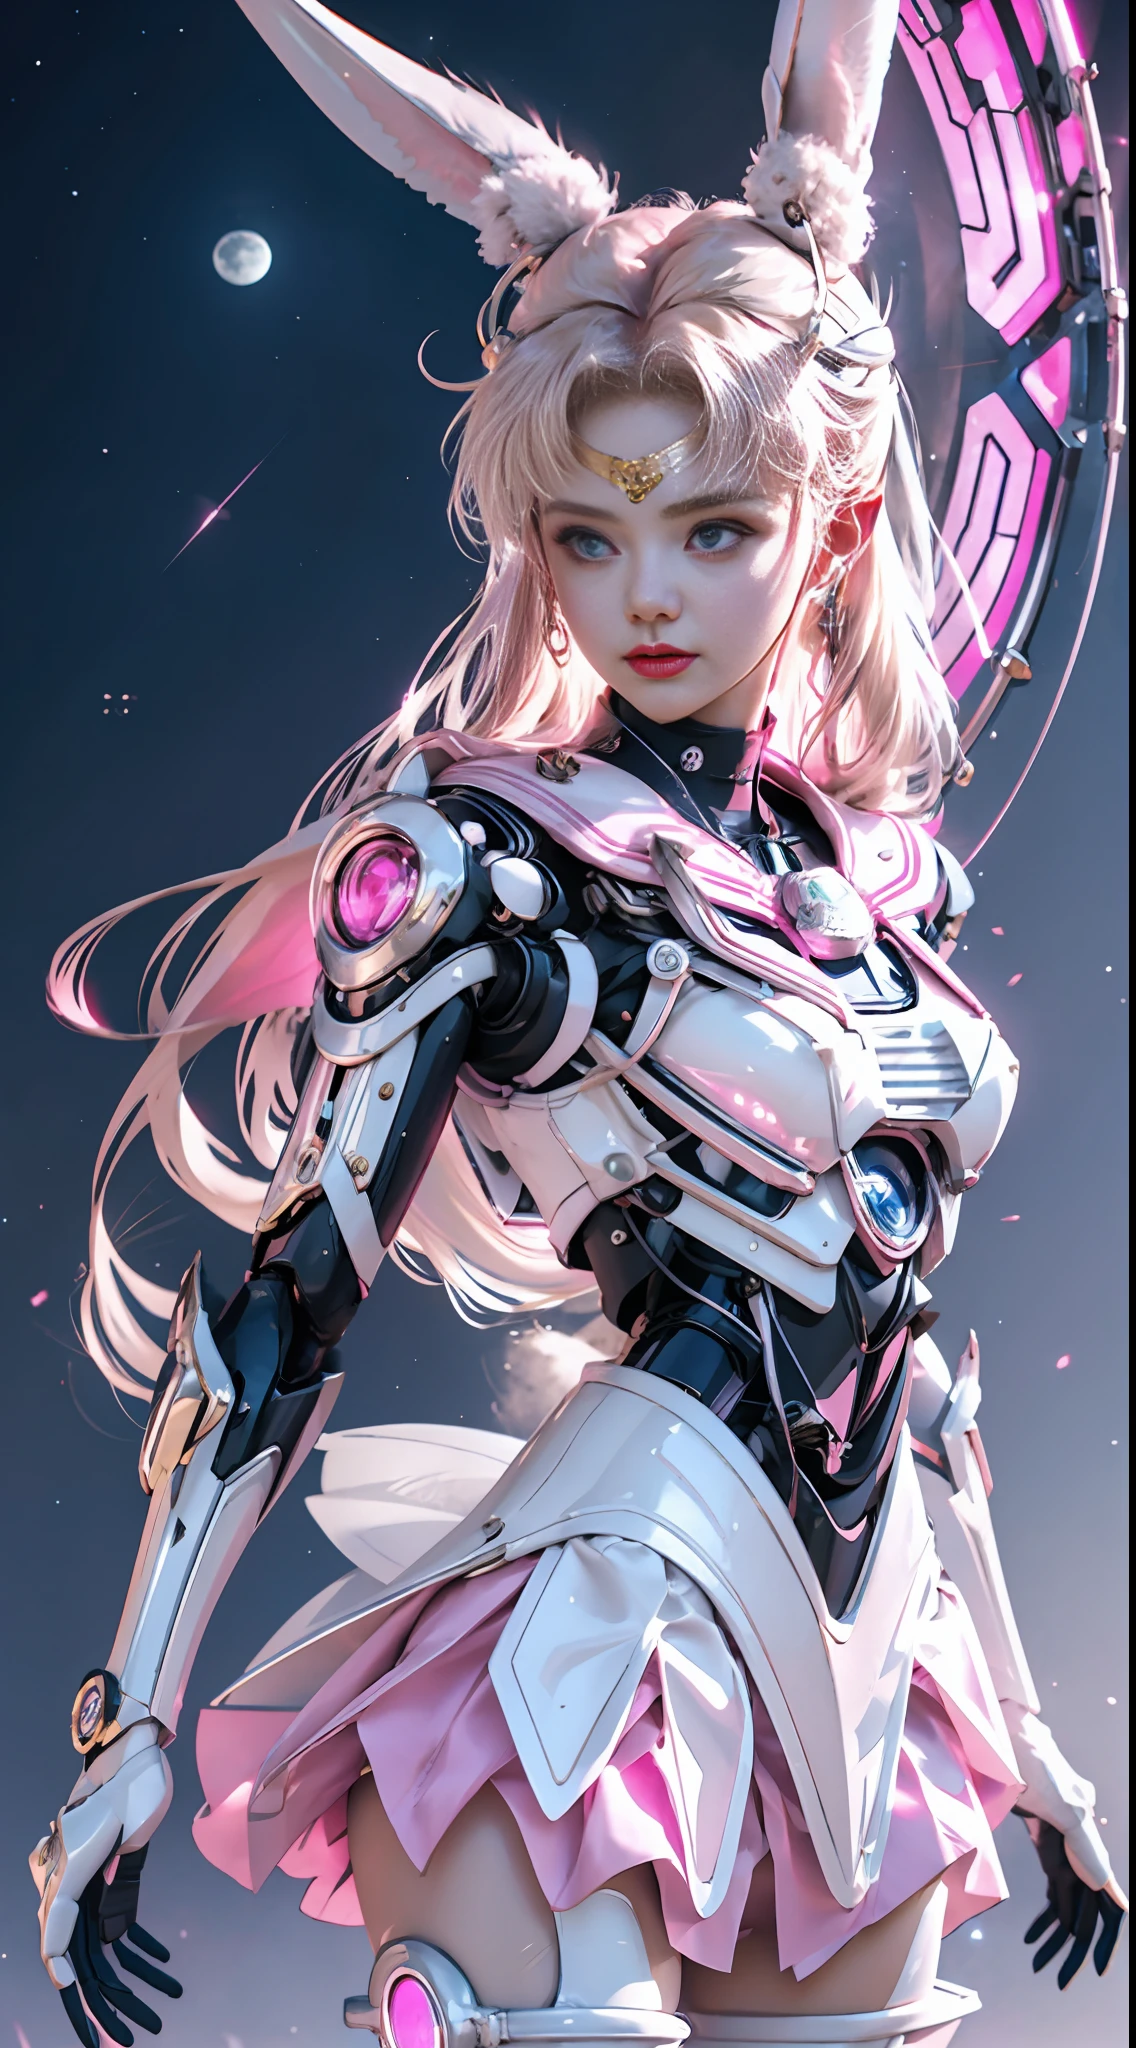 1 mechanical girl: 1.4, Sailor Moon, white mechanical arm, humanoid body, pink sailor suit, good-looking face, sailor Moon, wings, moon hare, rabbit ears, mechanical ears, white top, blonde hair, mechanical arm, pink skirt, side, halo, sci-fi background, hair glowing hair, forehead hair light, moon, panorama, archery, wings on the background